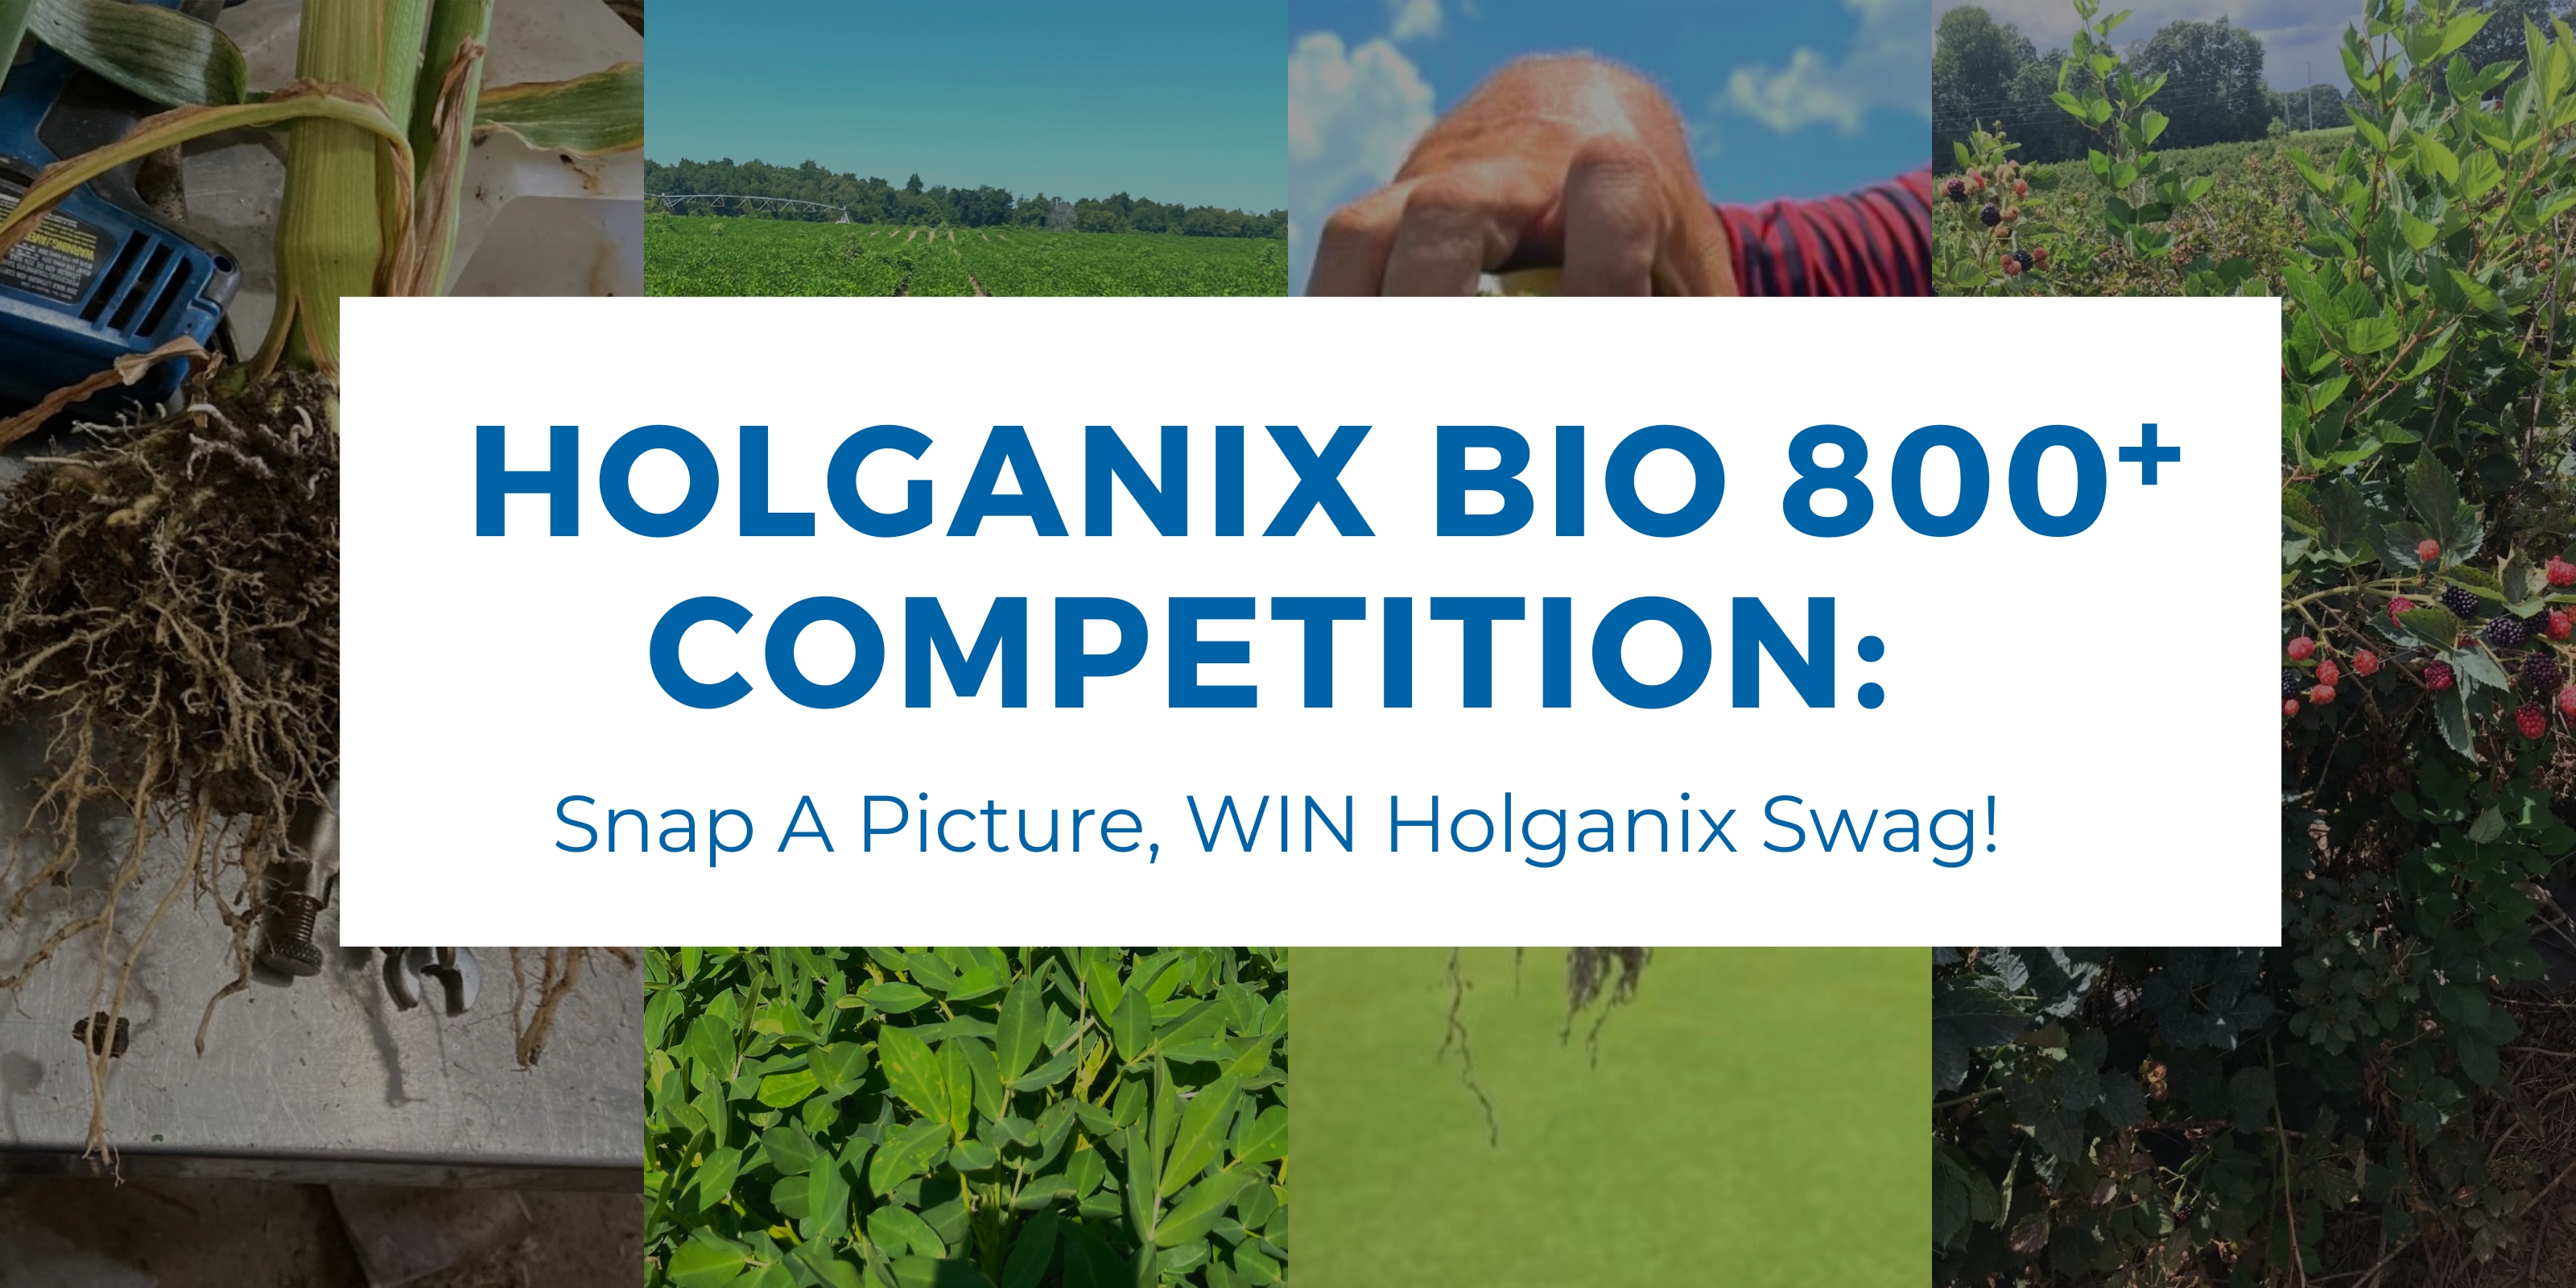 Holganix Bio 800 Competition: Snap a picture, WIN Holganix Swag!